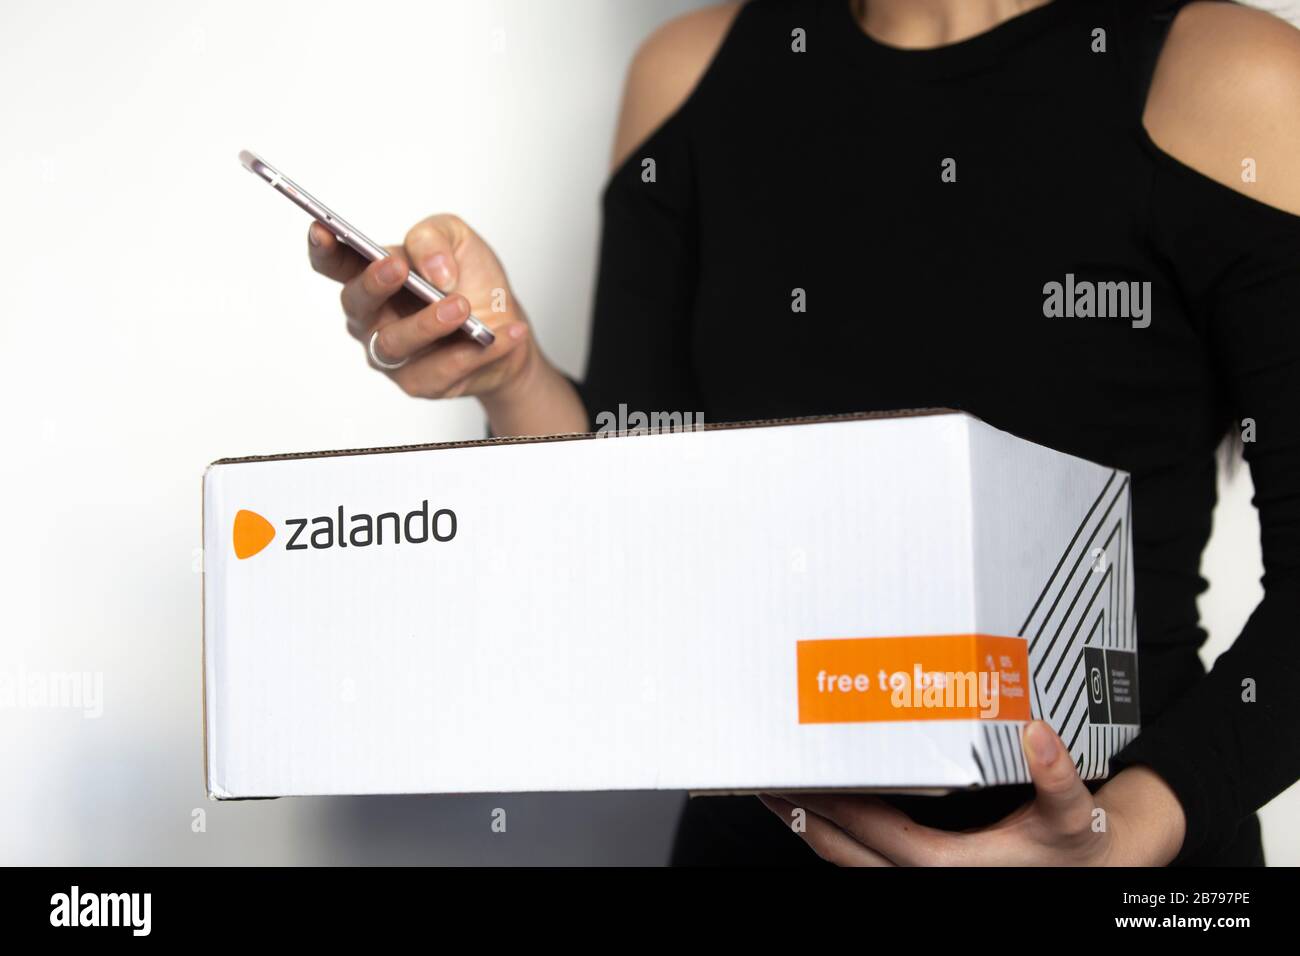 Poznan, Poland - March 14, 2020: Woman holding a Zalando box with ordered items from the online shop. Stock Photo